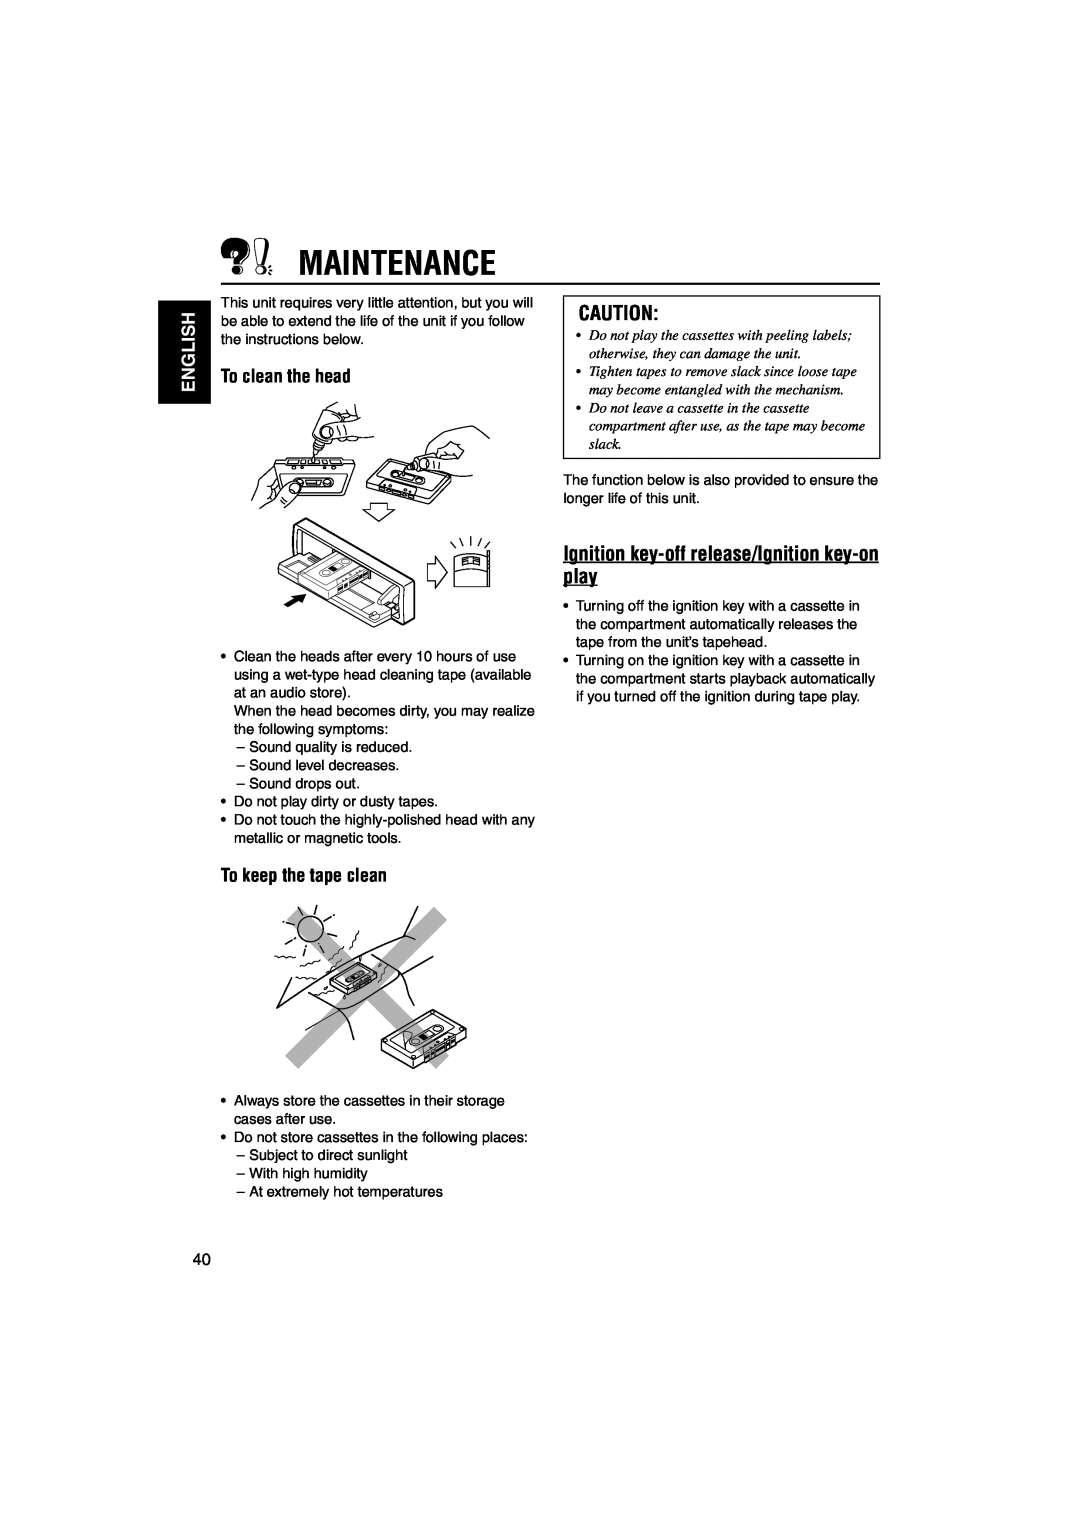 JVC GET0140-001A, KS-FX842R manual Maintenance, Ignition key-off release/Ignition key-on play, English, To clean the head 